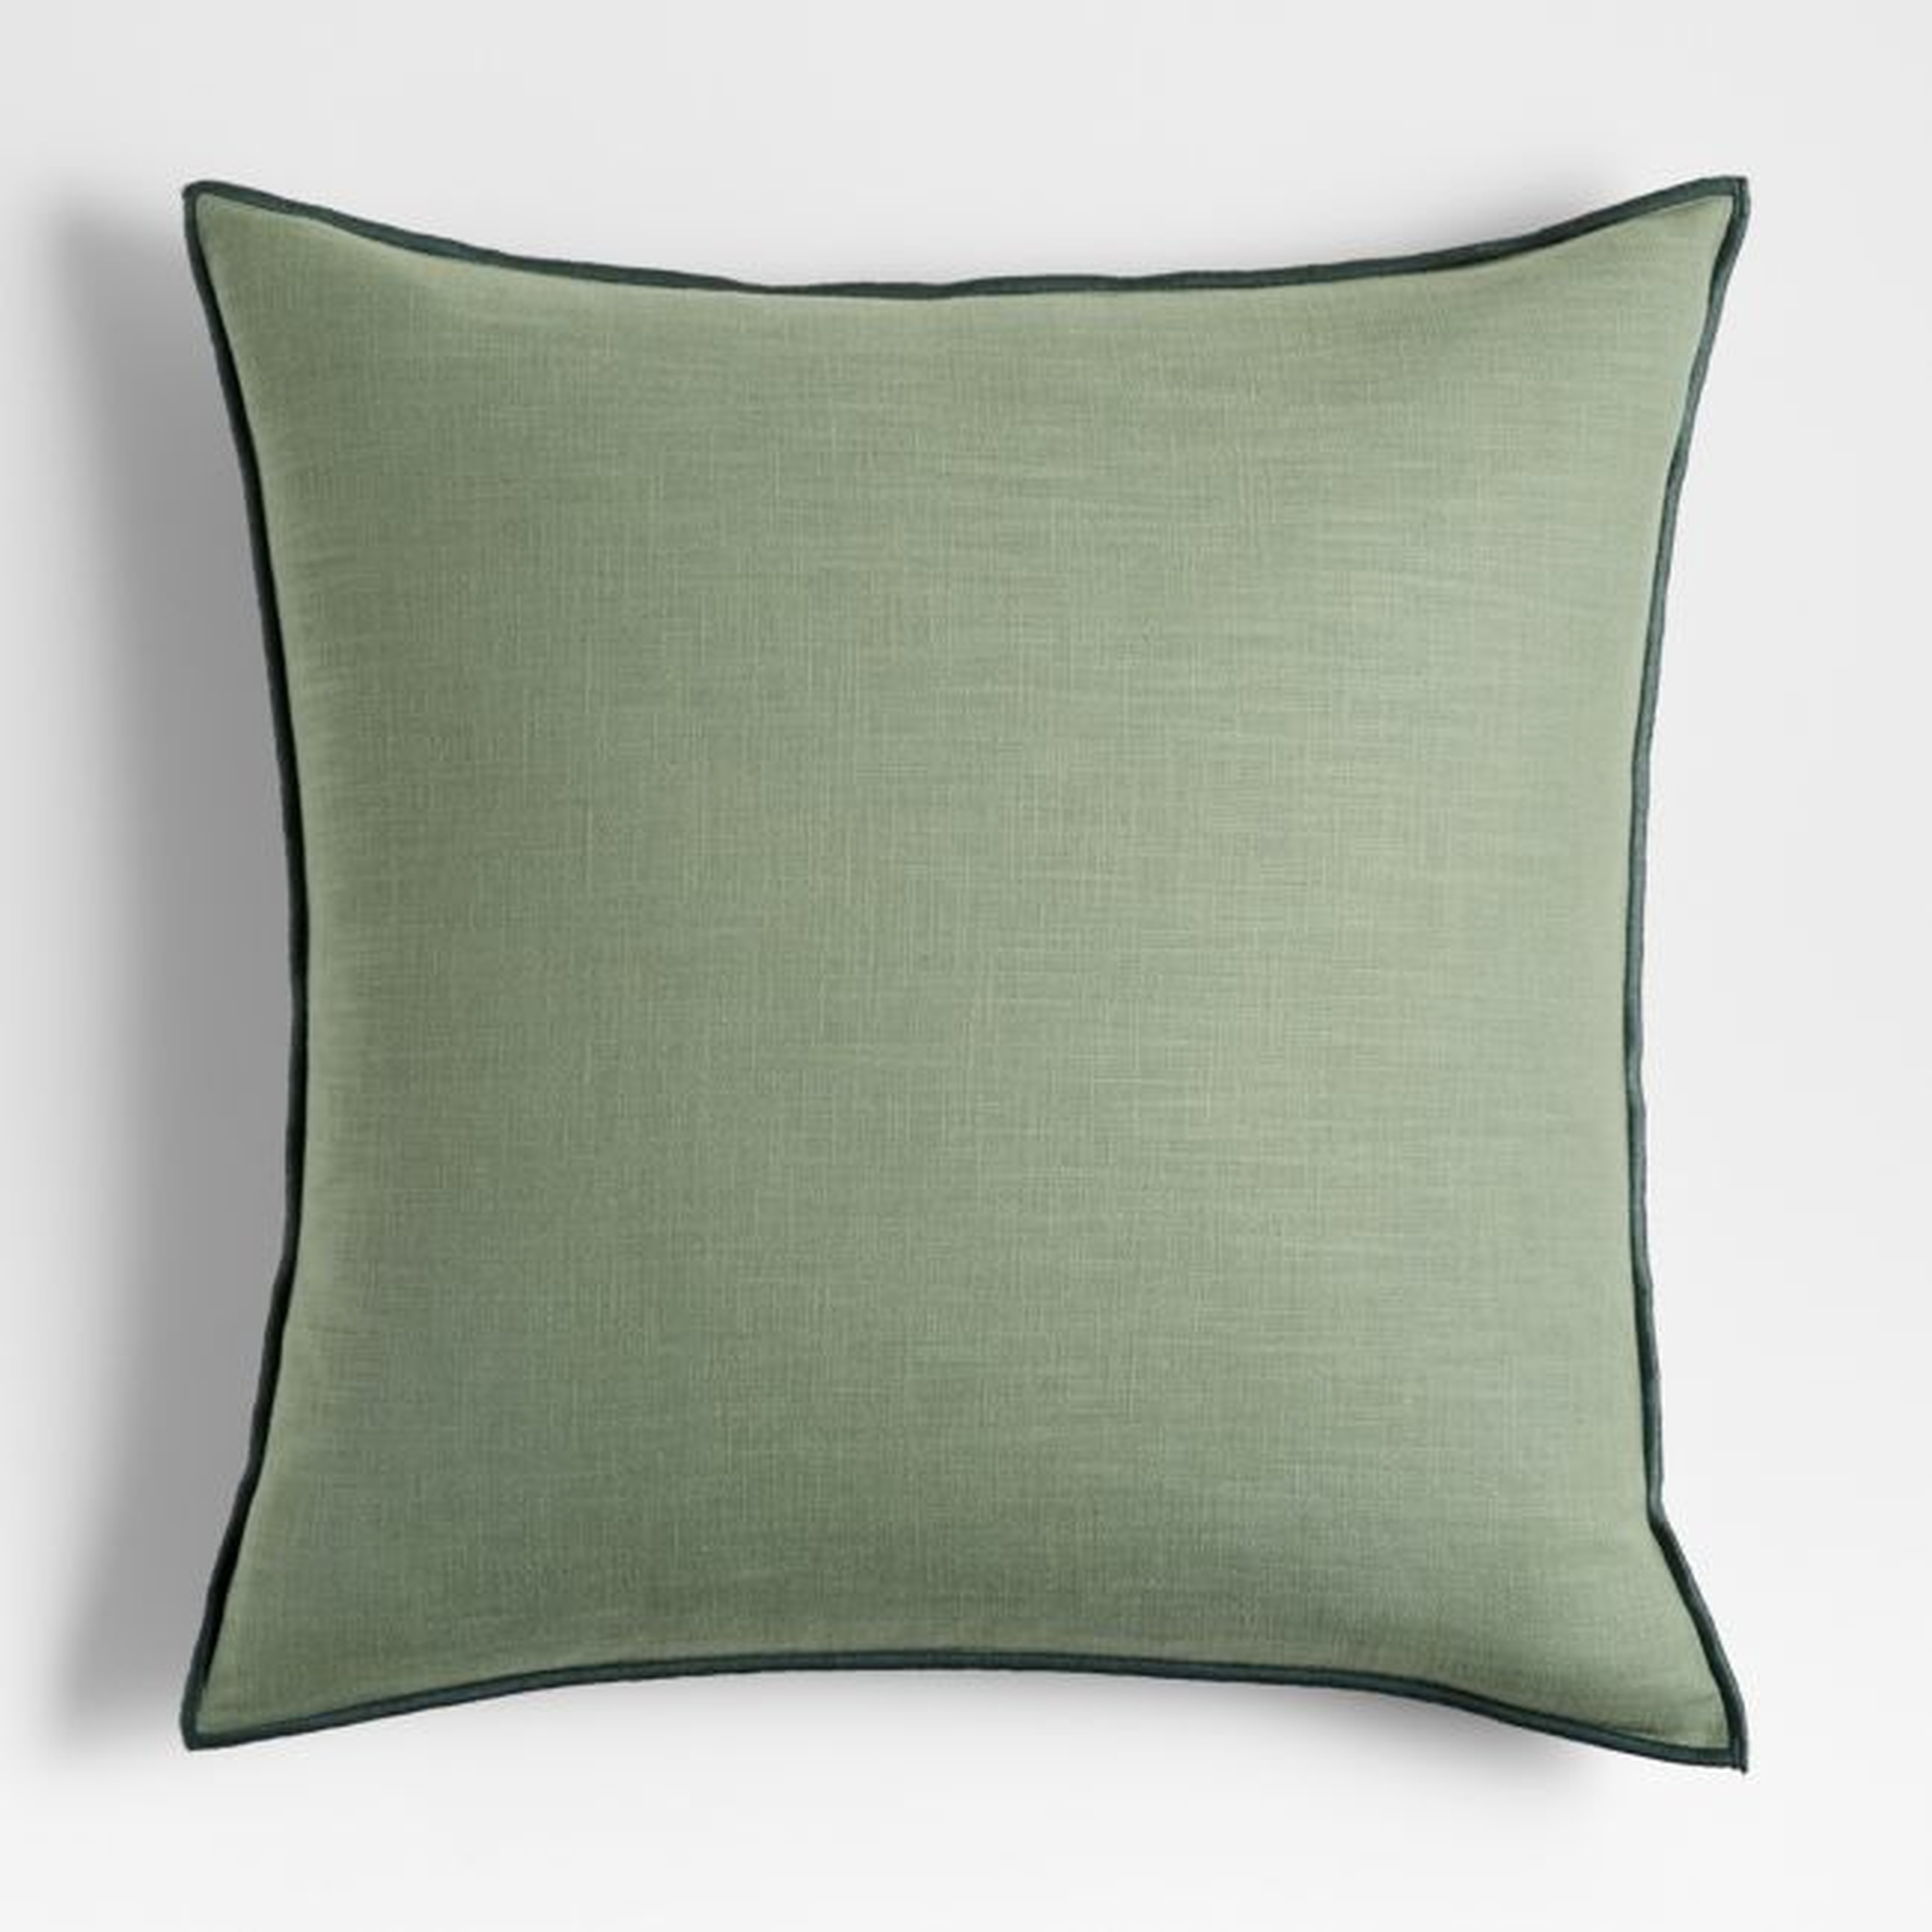 Sage 23"x23" Merrow Stitch Cotton Throw Pillow with Down-Alternative Insert - Crate and Barrel